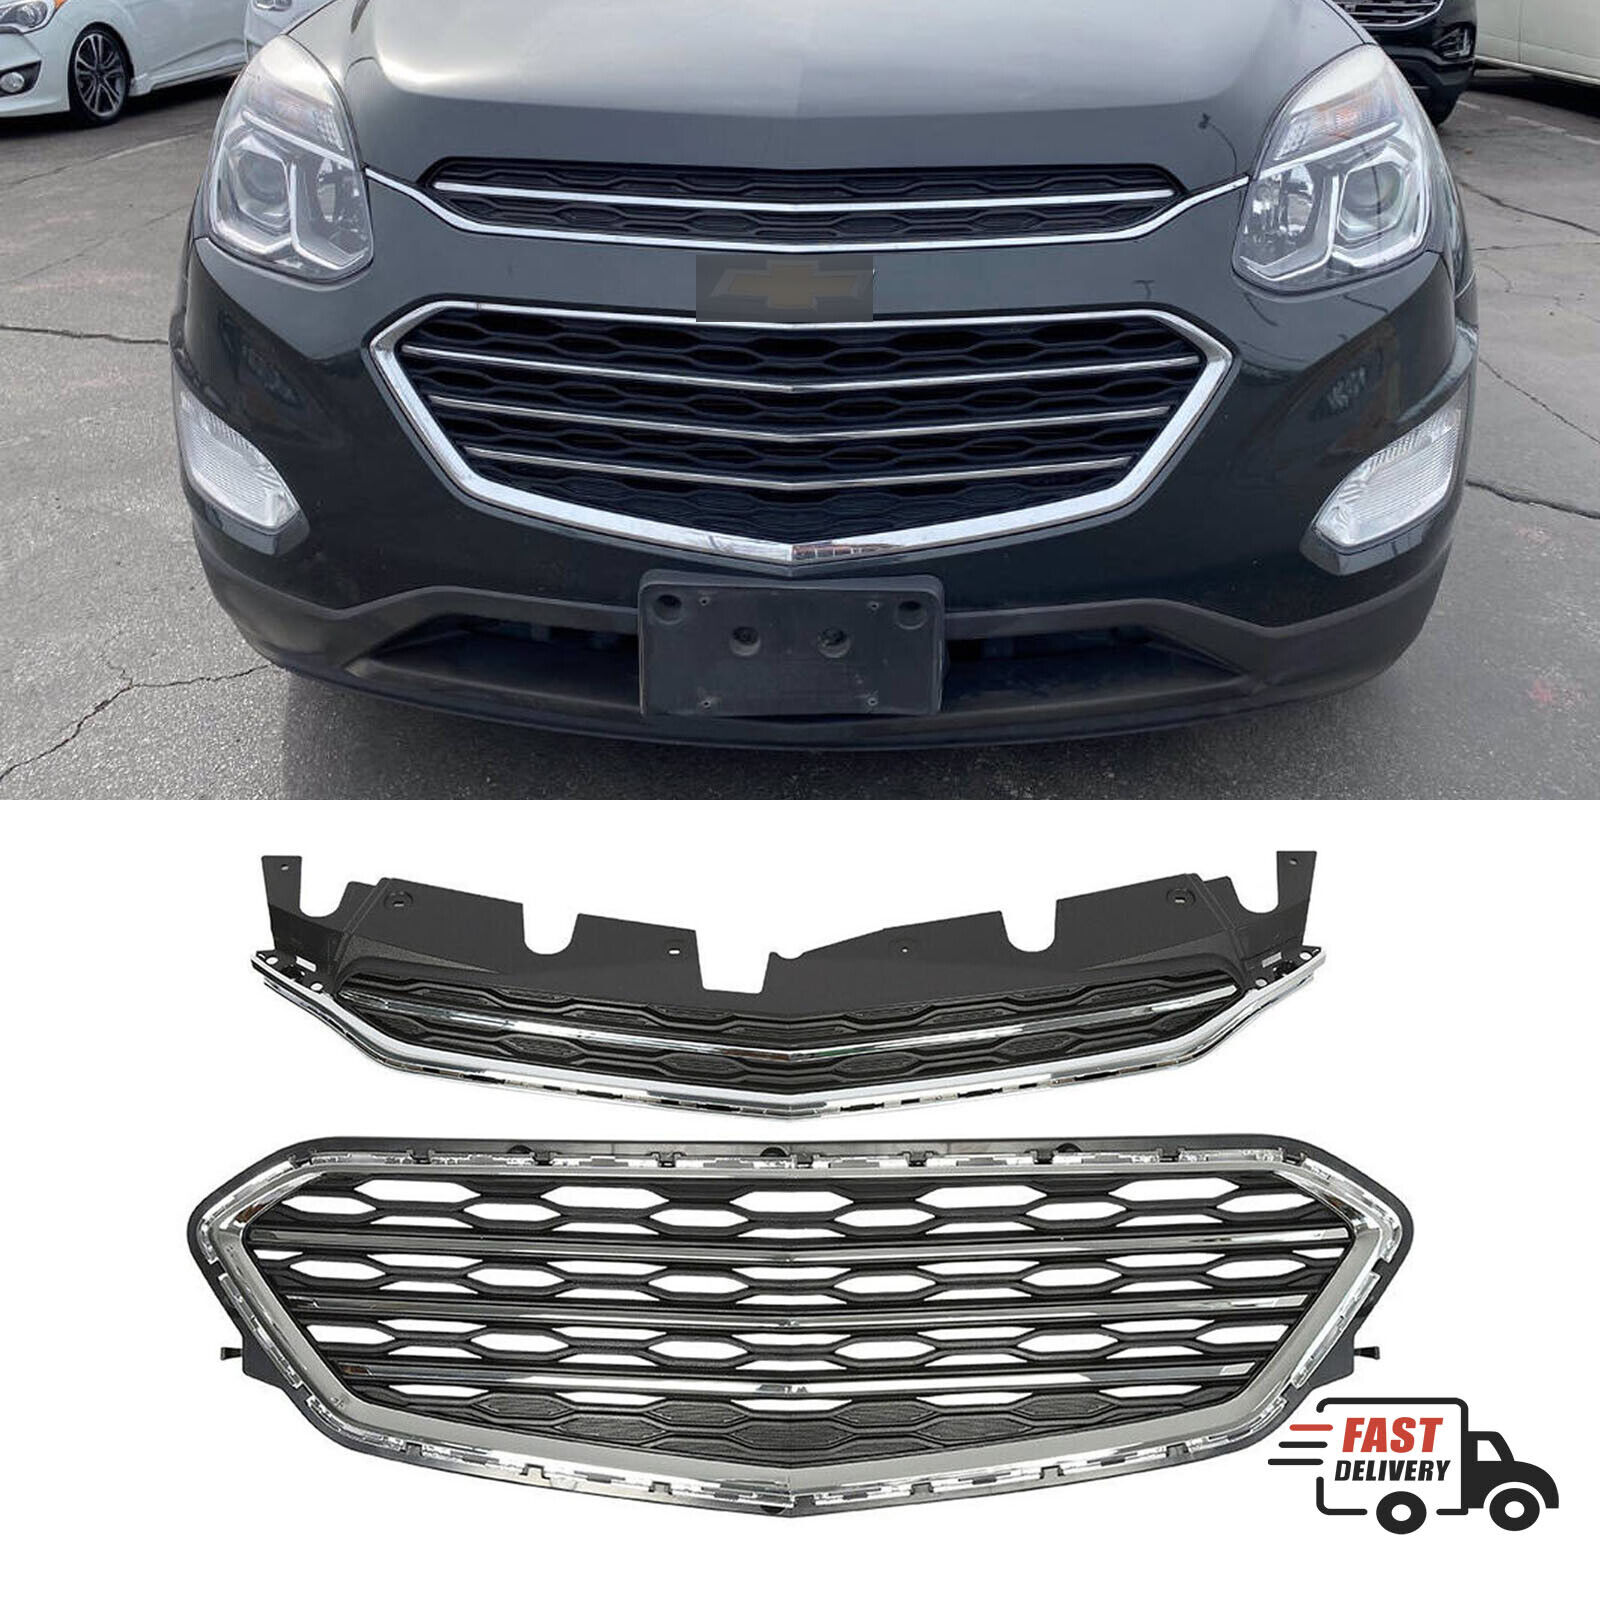 Chrome Front Bumper Grill Upper Lower Grille For 2016 2017 Chevrolet Equinox